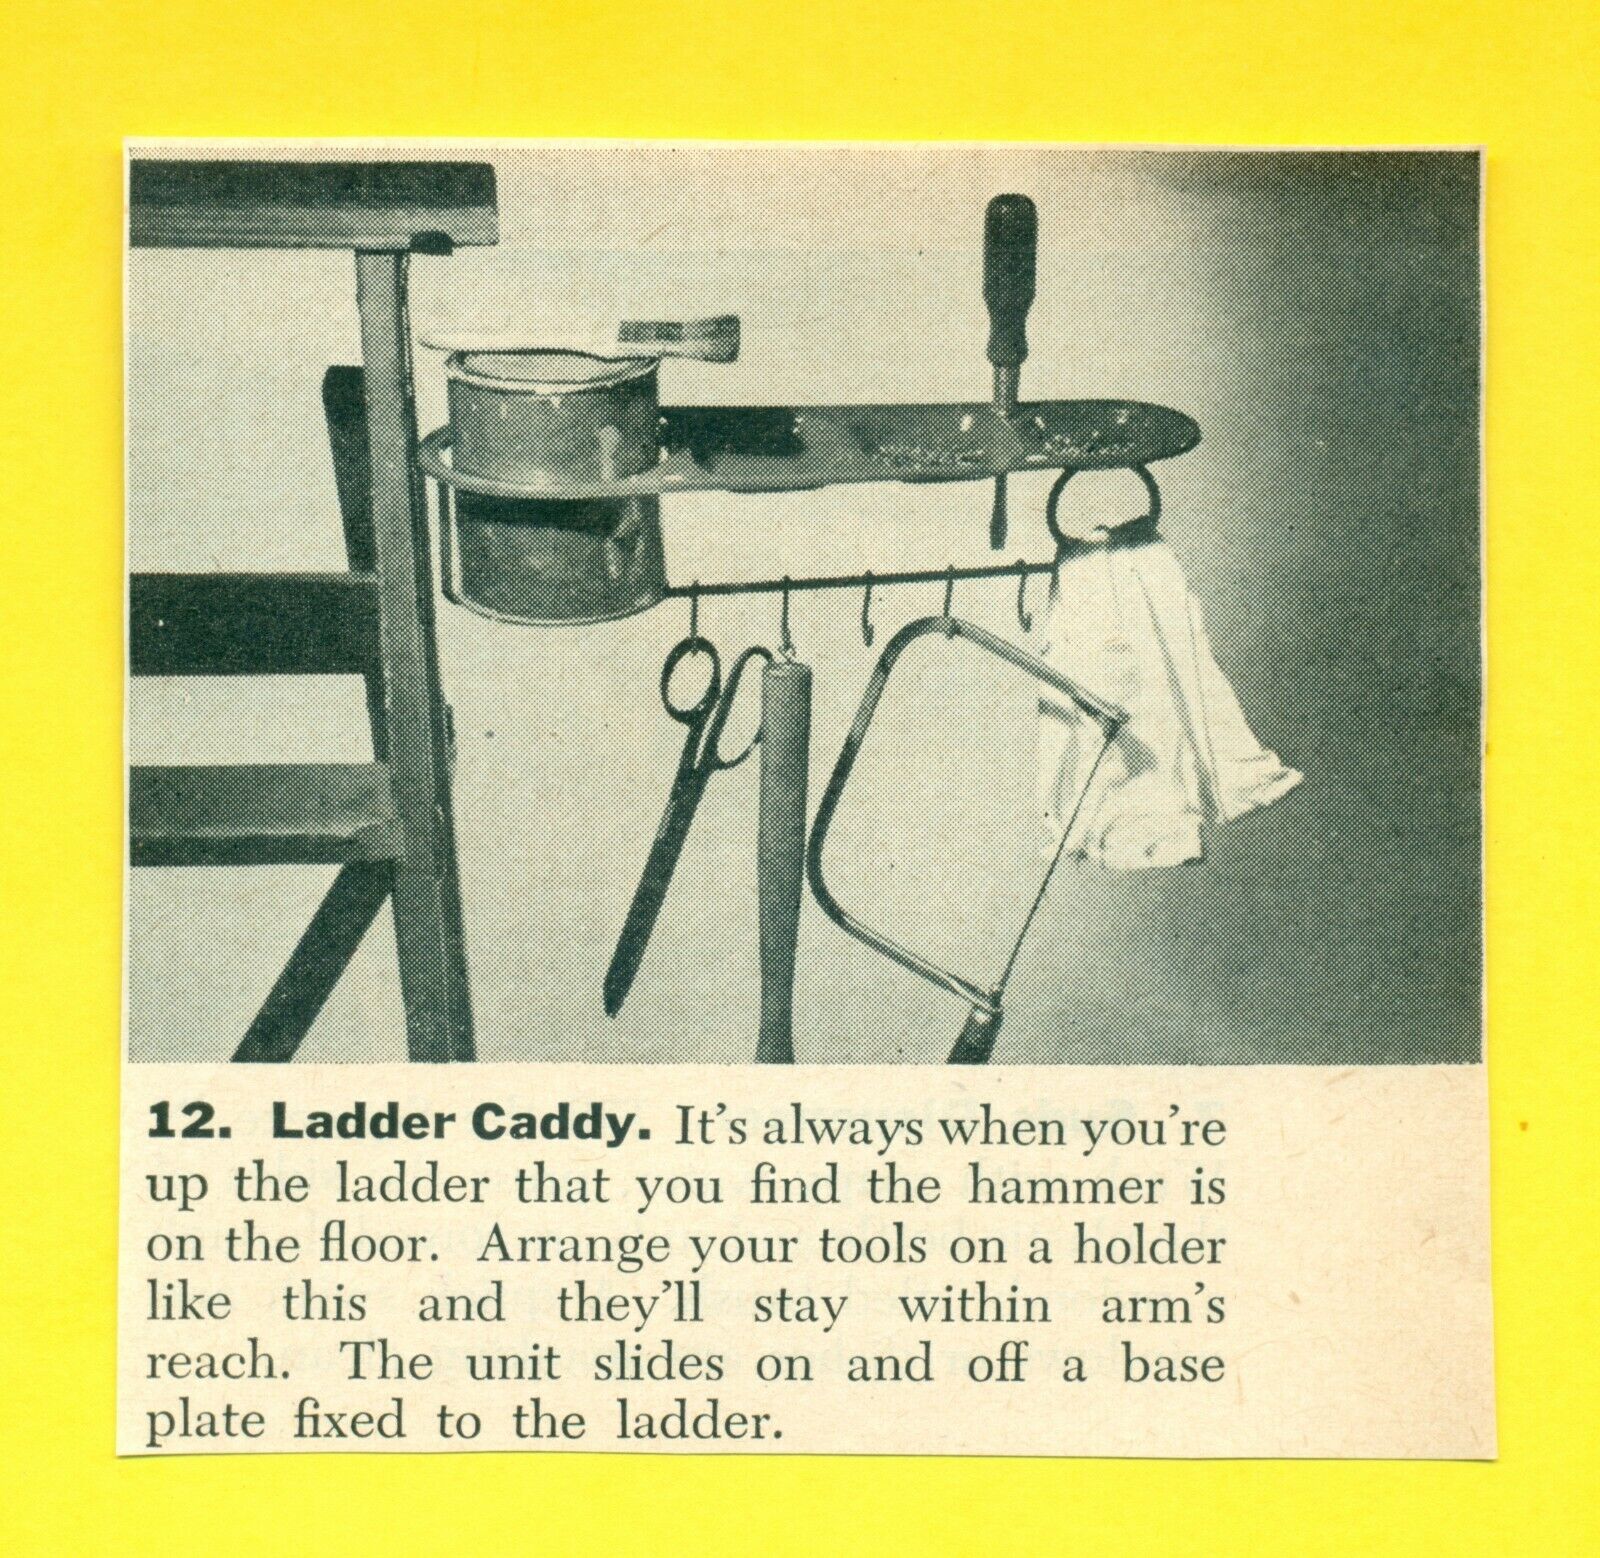 1952 Ladder Caddy arrange your tools on a holder like this Vintage Print Ad SV2.